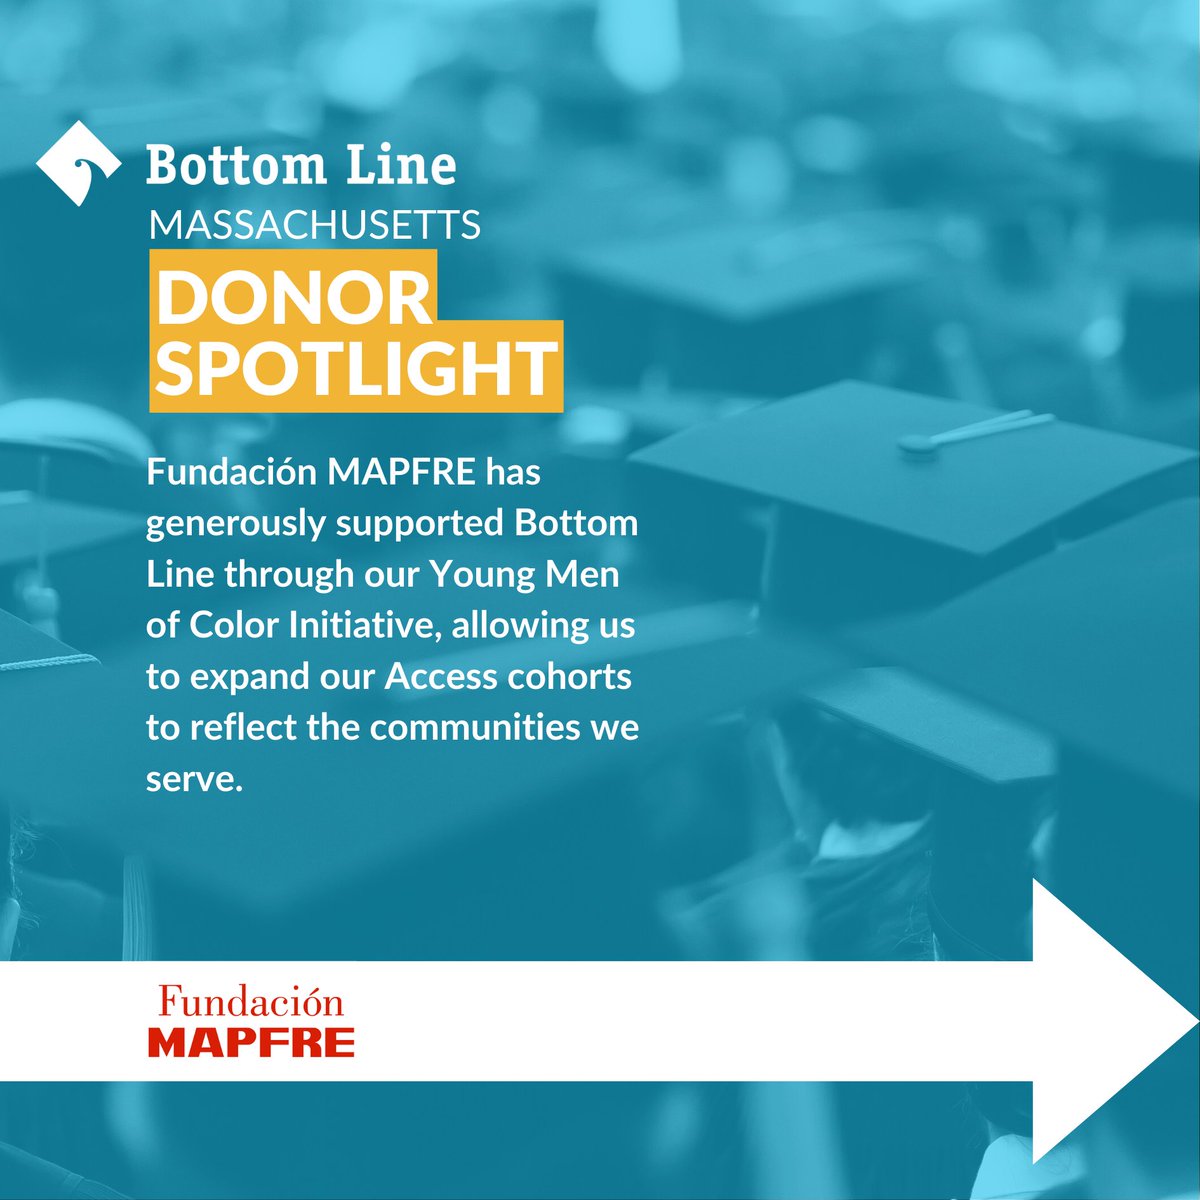 Bottom Line Massachusetts thanks Fundación MAPFRE for their generous ongoing support of Bottom Line & our Young Men of Color Initiative. @MAPFREIns has been a vital signature partner as Bottom Line expands our Access cohorts to ensure they reflect the communities we serve.